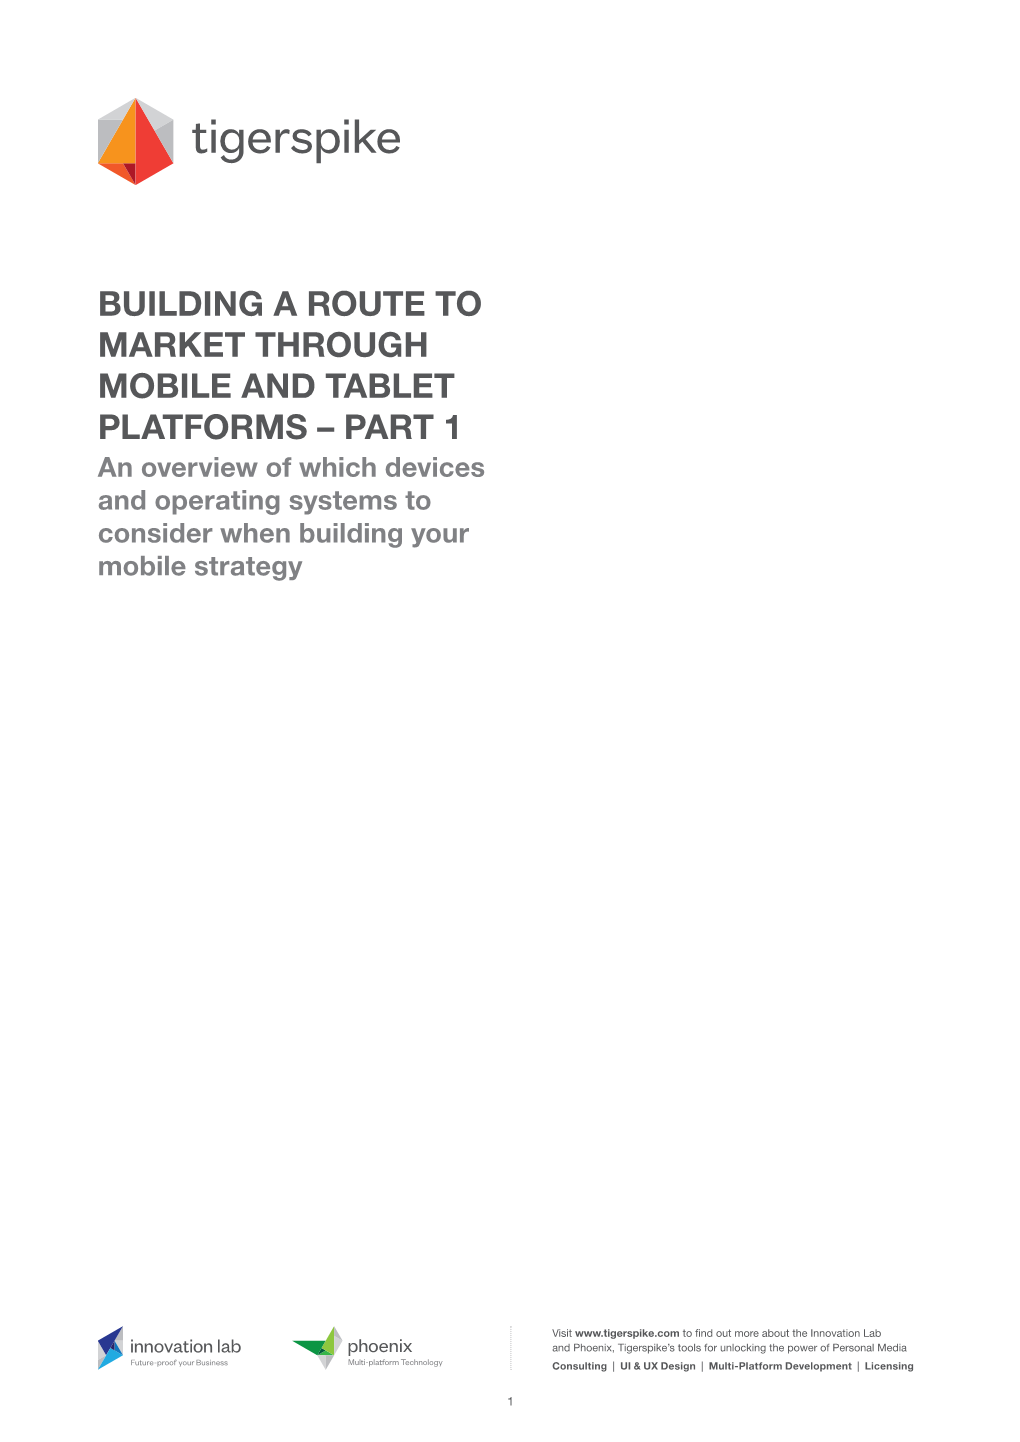 Building a Route to Market Through Mobile and Tablet